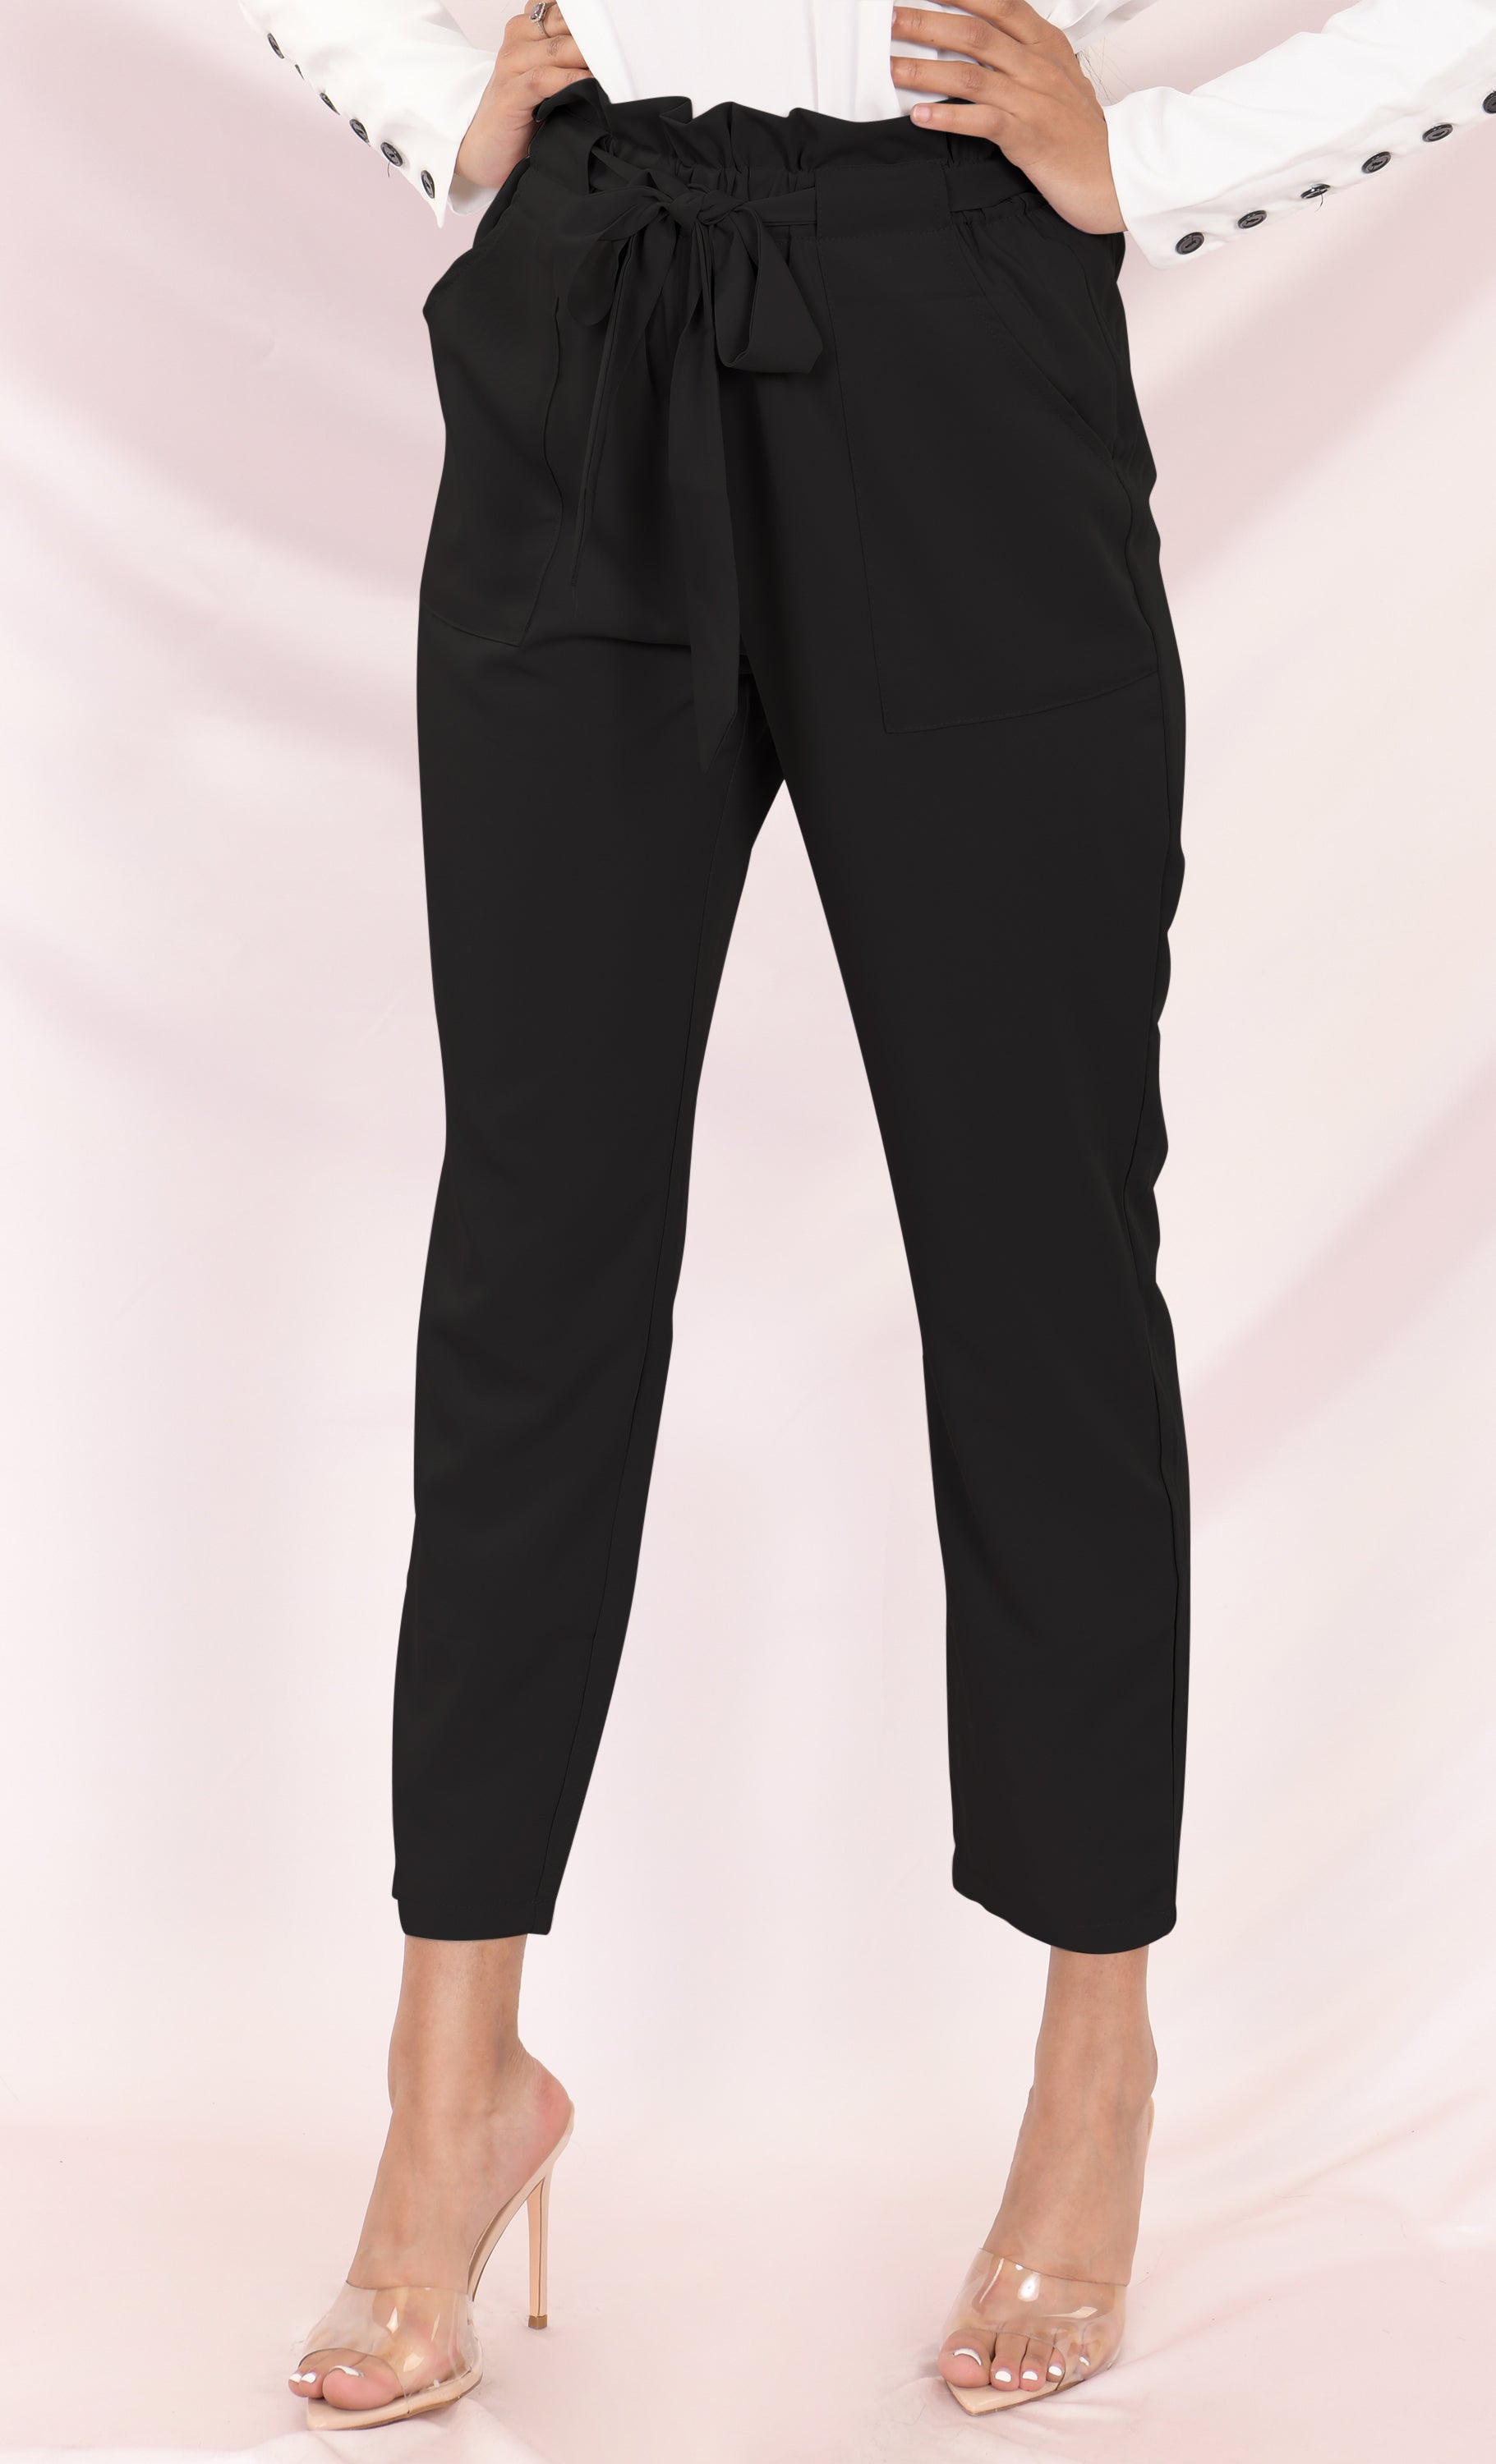 Women Solid Casual Work Trousers High Waist Ruffle Bow Tie Pants Pencil  Trousers | eBay